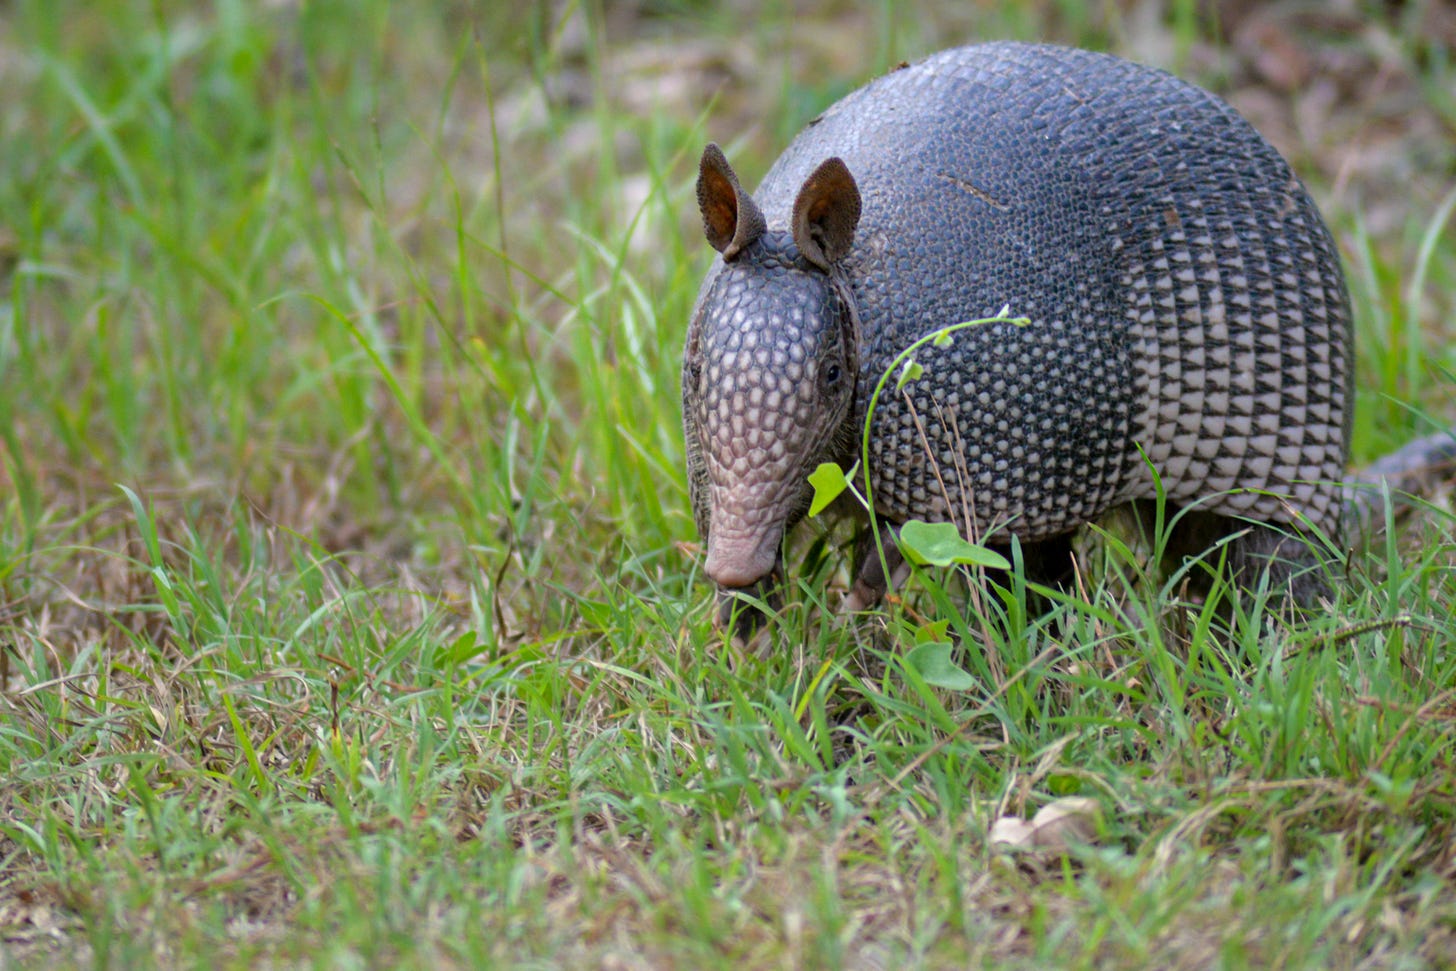 An armadillo hanging out in some grass, looking chill